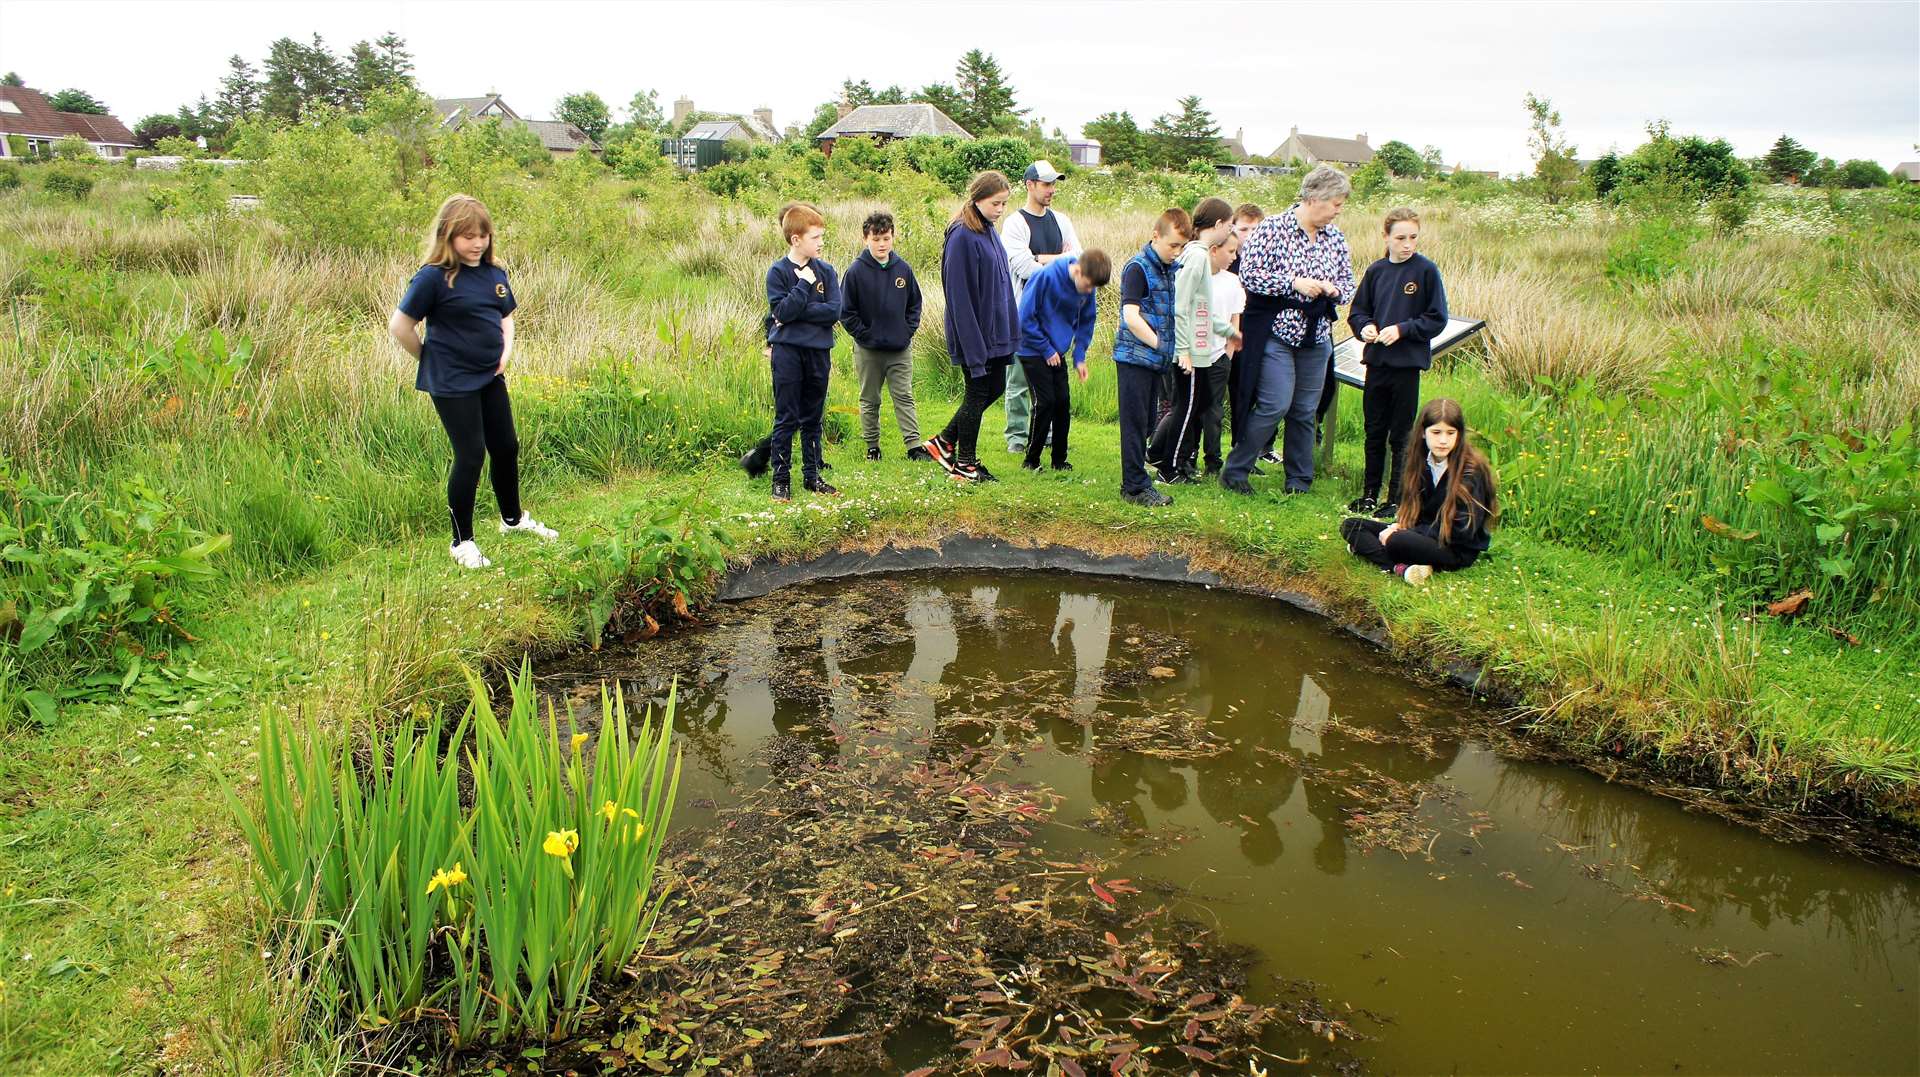 The children gather by a pond and learn about plants and animals that live in and around it. Picture: DGS